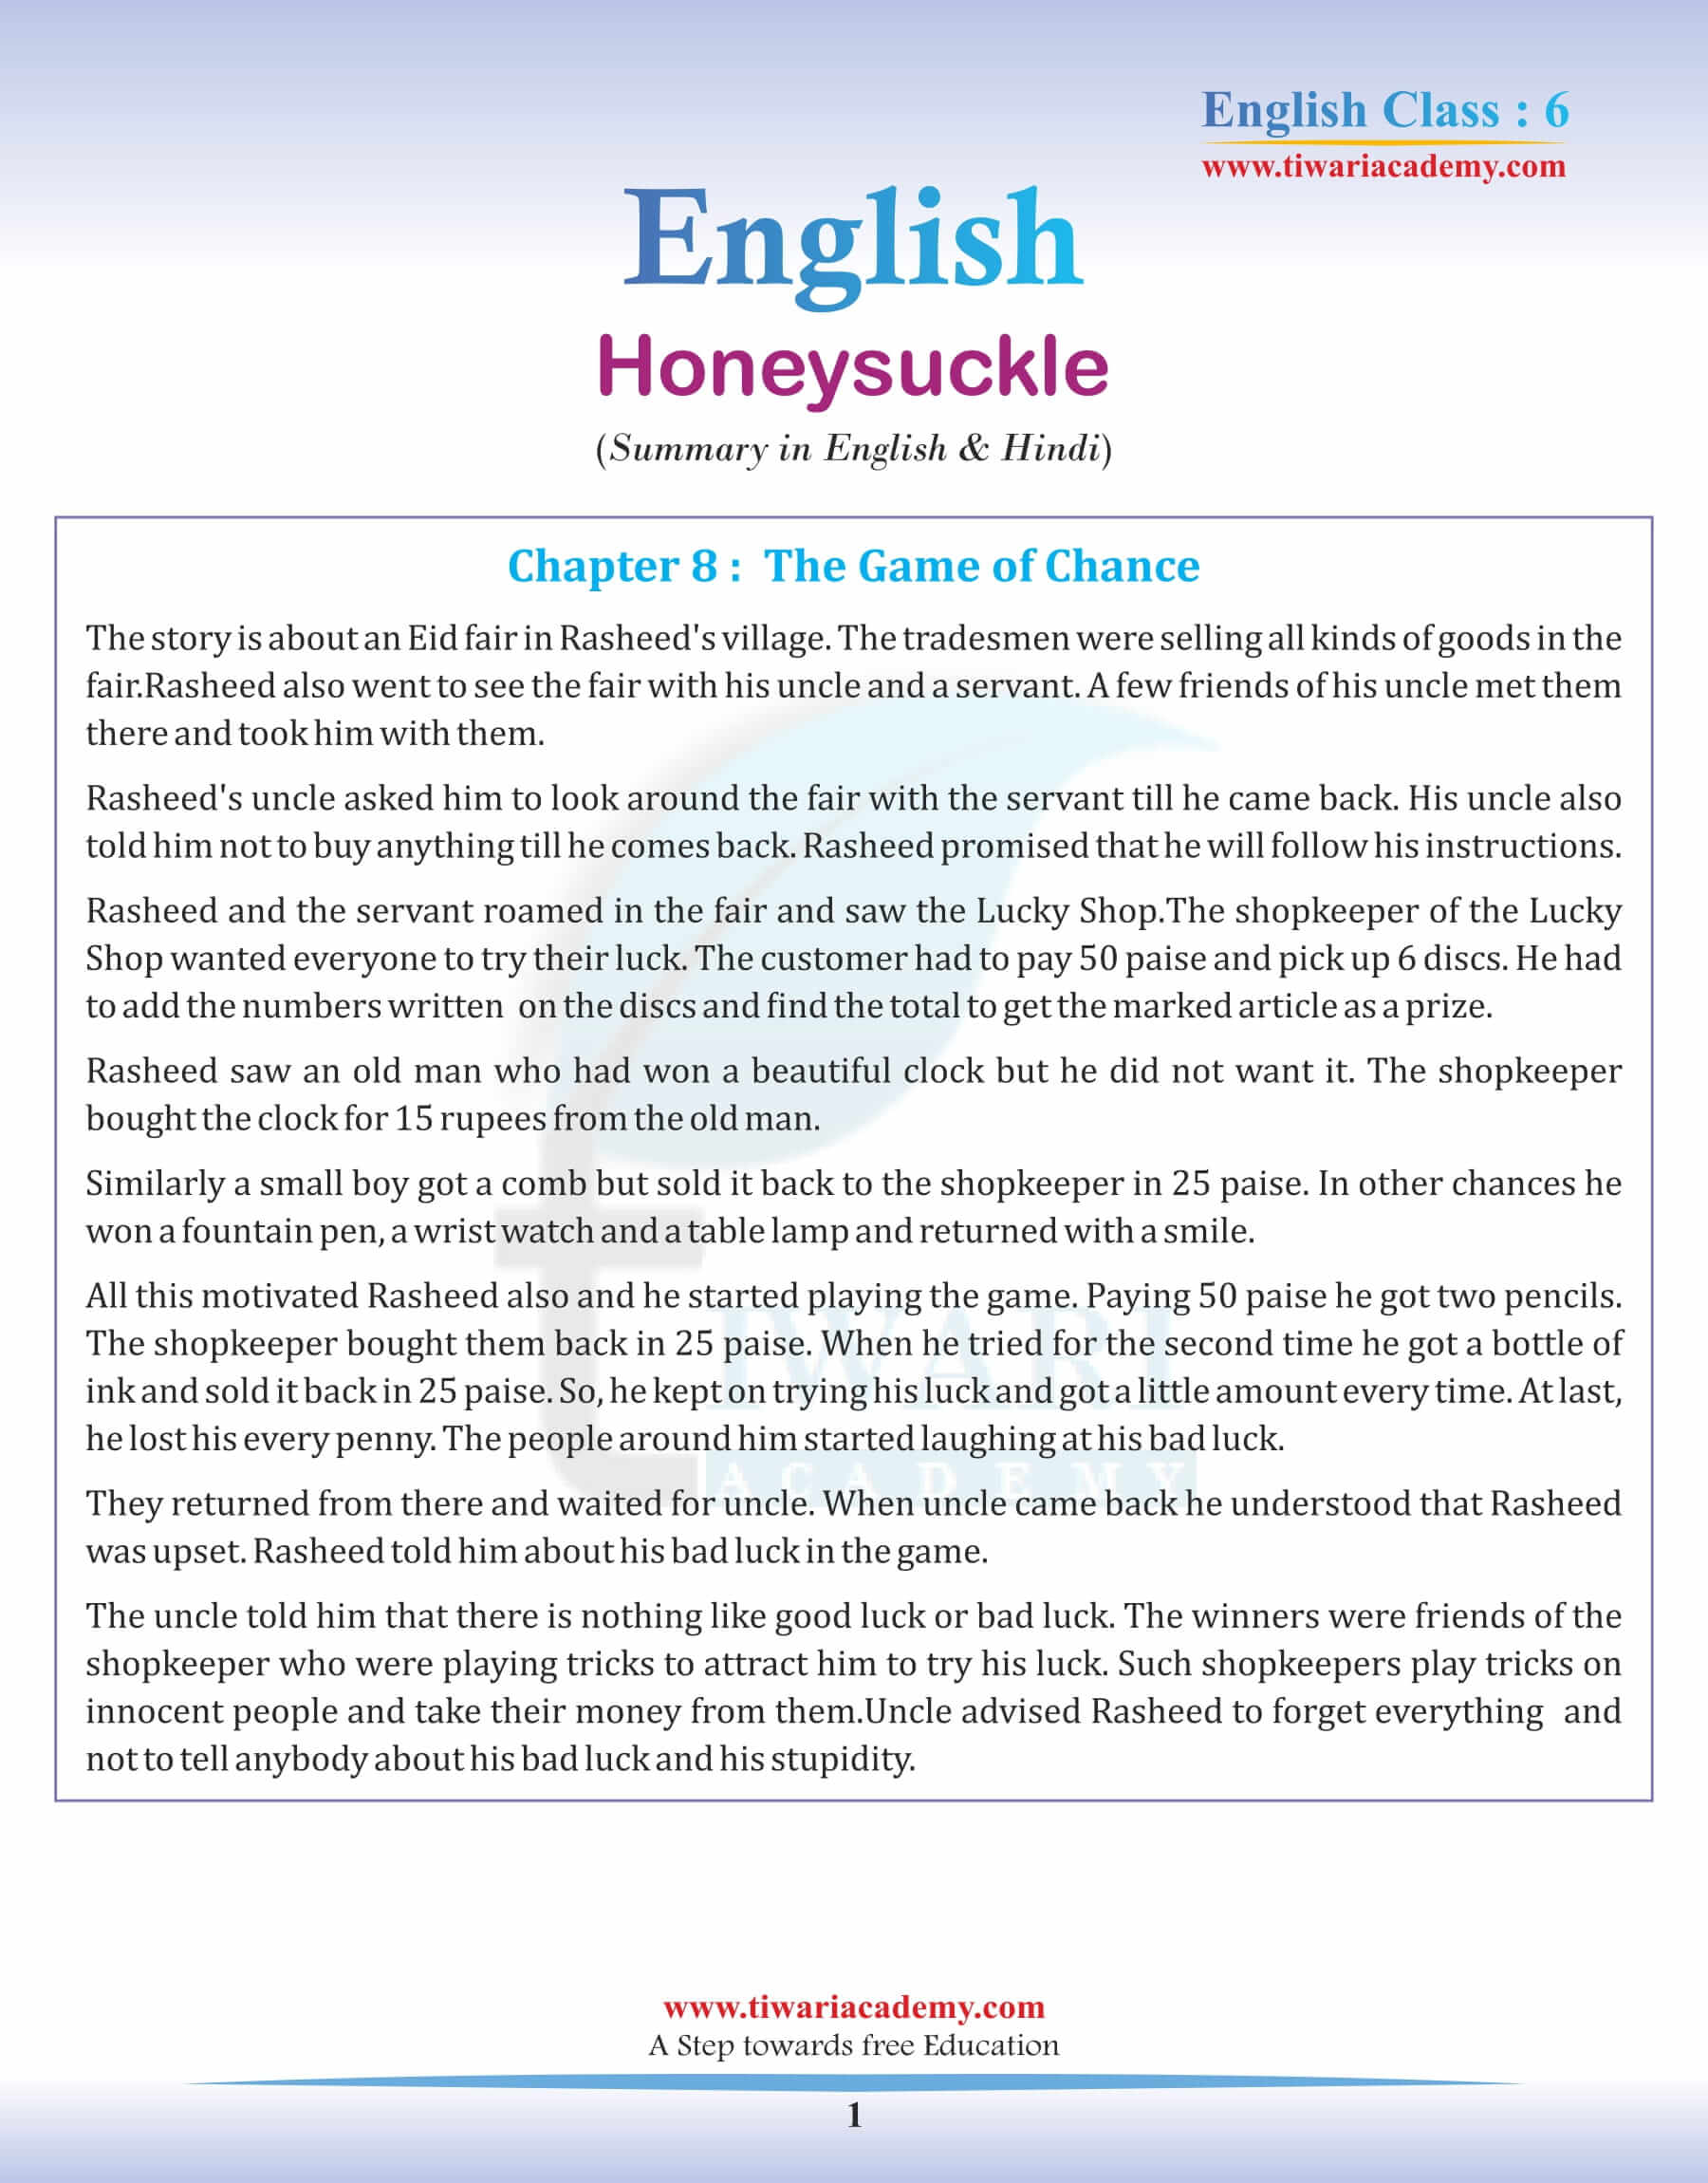 Class 6 English Chapter 8 Summary in English